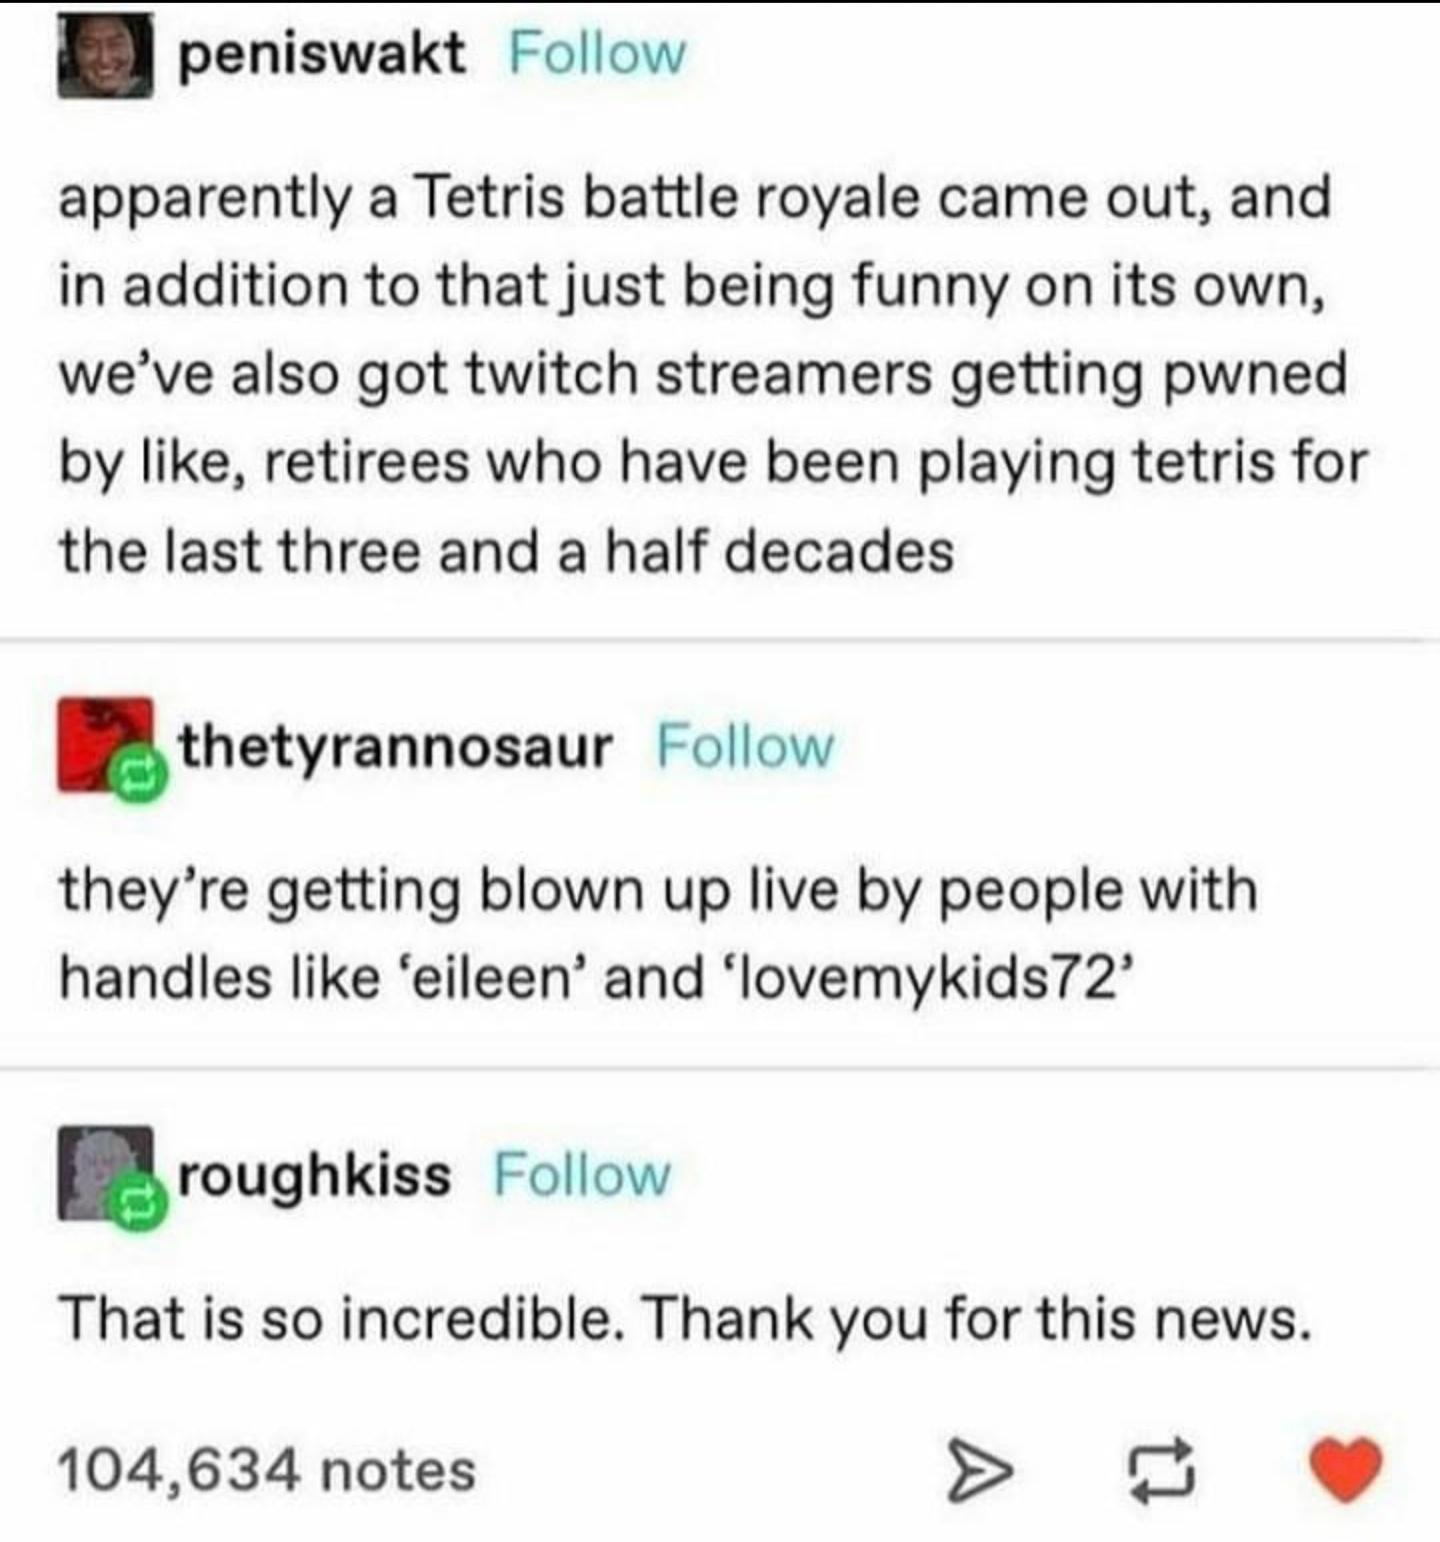 paper - peniswakt apparently a Tetris battle royale came out, and in addition to that just being funny on its own, we've also got twitch streamers getting pwned by , retirees who have been playing tetris for the last three and a half decades thetyrannosau